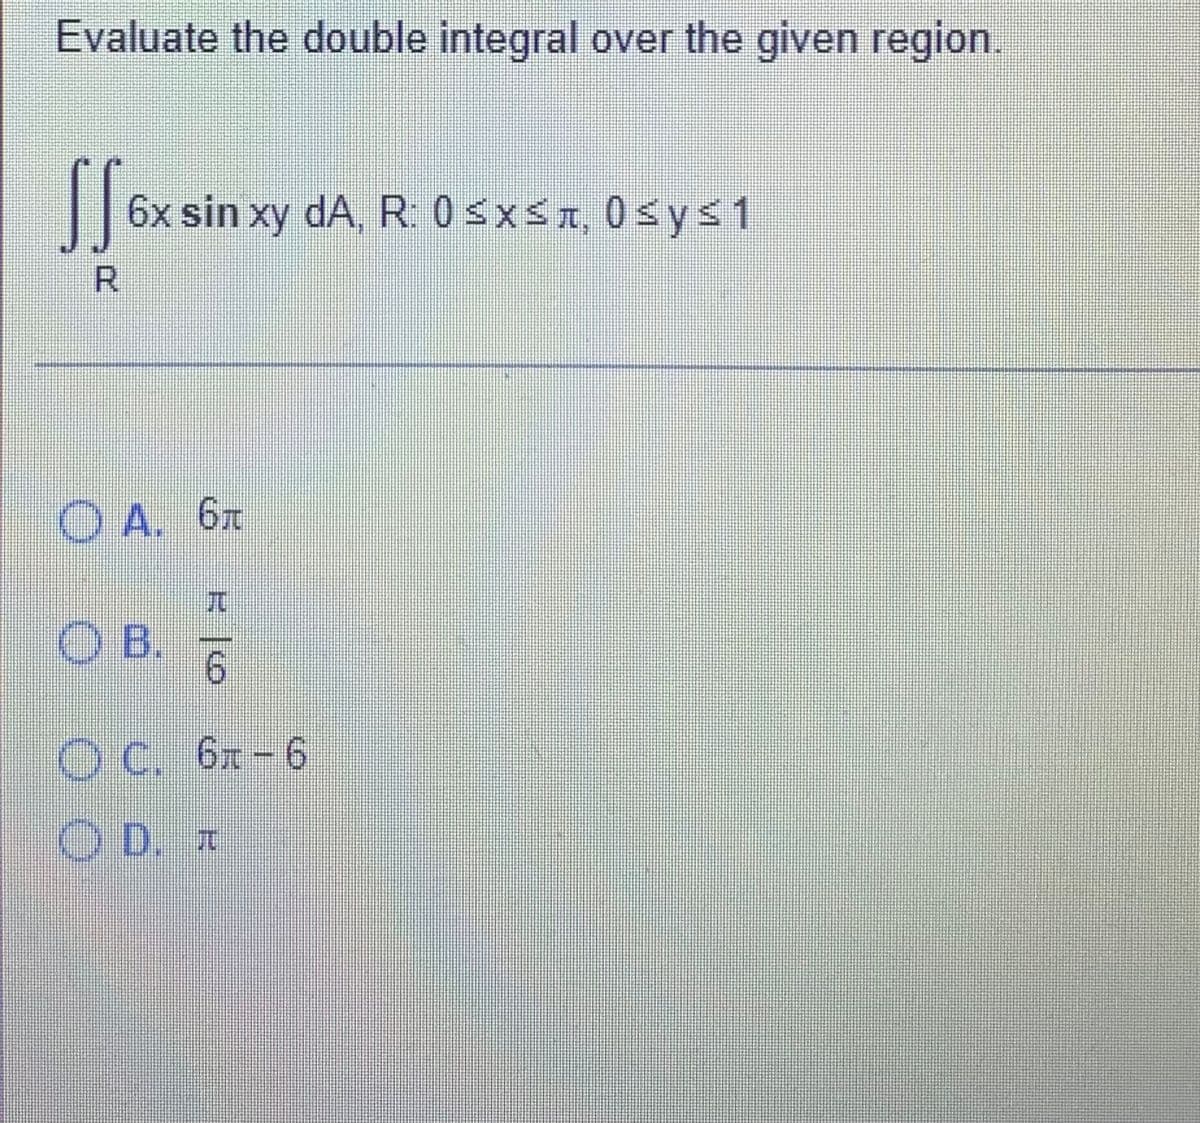 Evaluate the double integral over the given region.
|6x sin xy
dA, R. 0 SxsA, 0sys1
R.
O A. 6x
兀
OB.
9.
O C. 6x-6
O D. I
